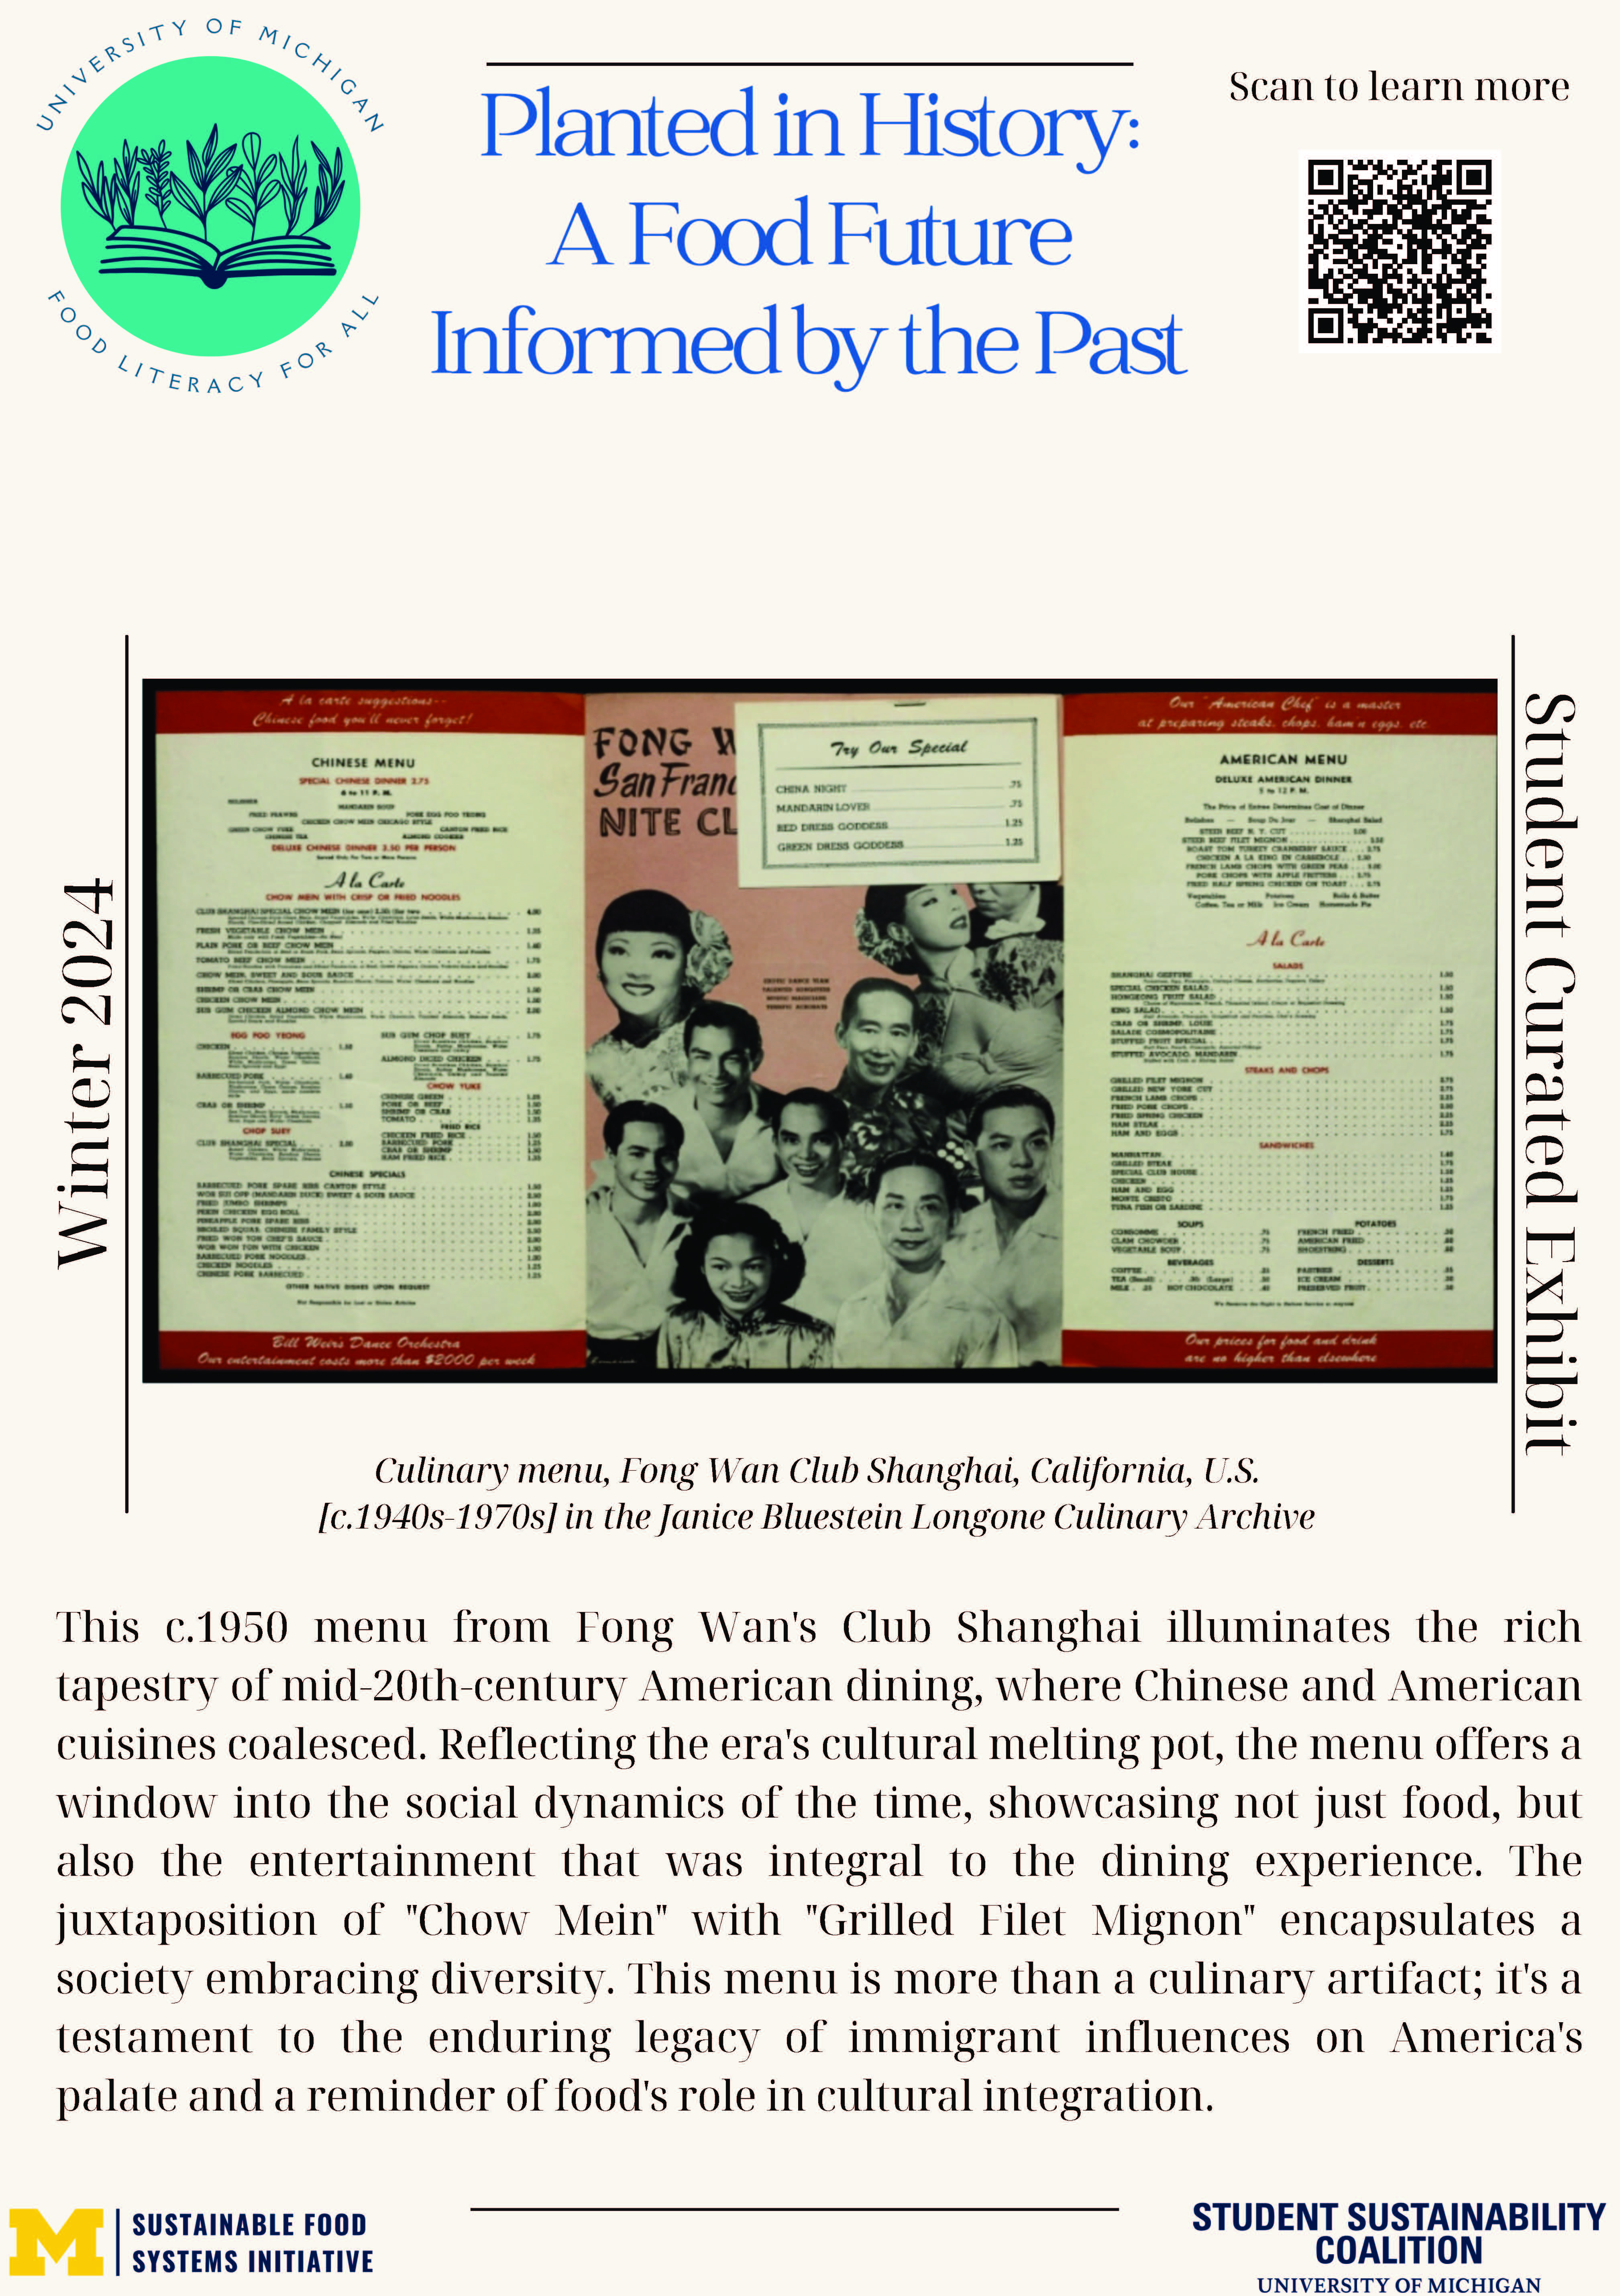 Poster highlighting a menu from the Fong Wan Club Shanghai in California (circa 1940s-1970s) from the Janice Bluestein Longone Culinary Archive. The cover of the menu shows a black and white photograph of group of glamourous-looking Asian men and women. Main text in caption. 